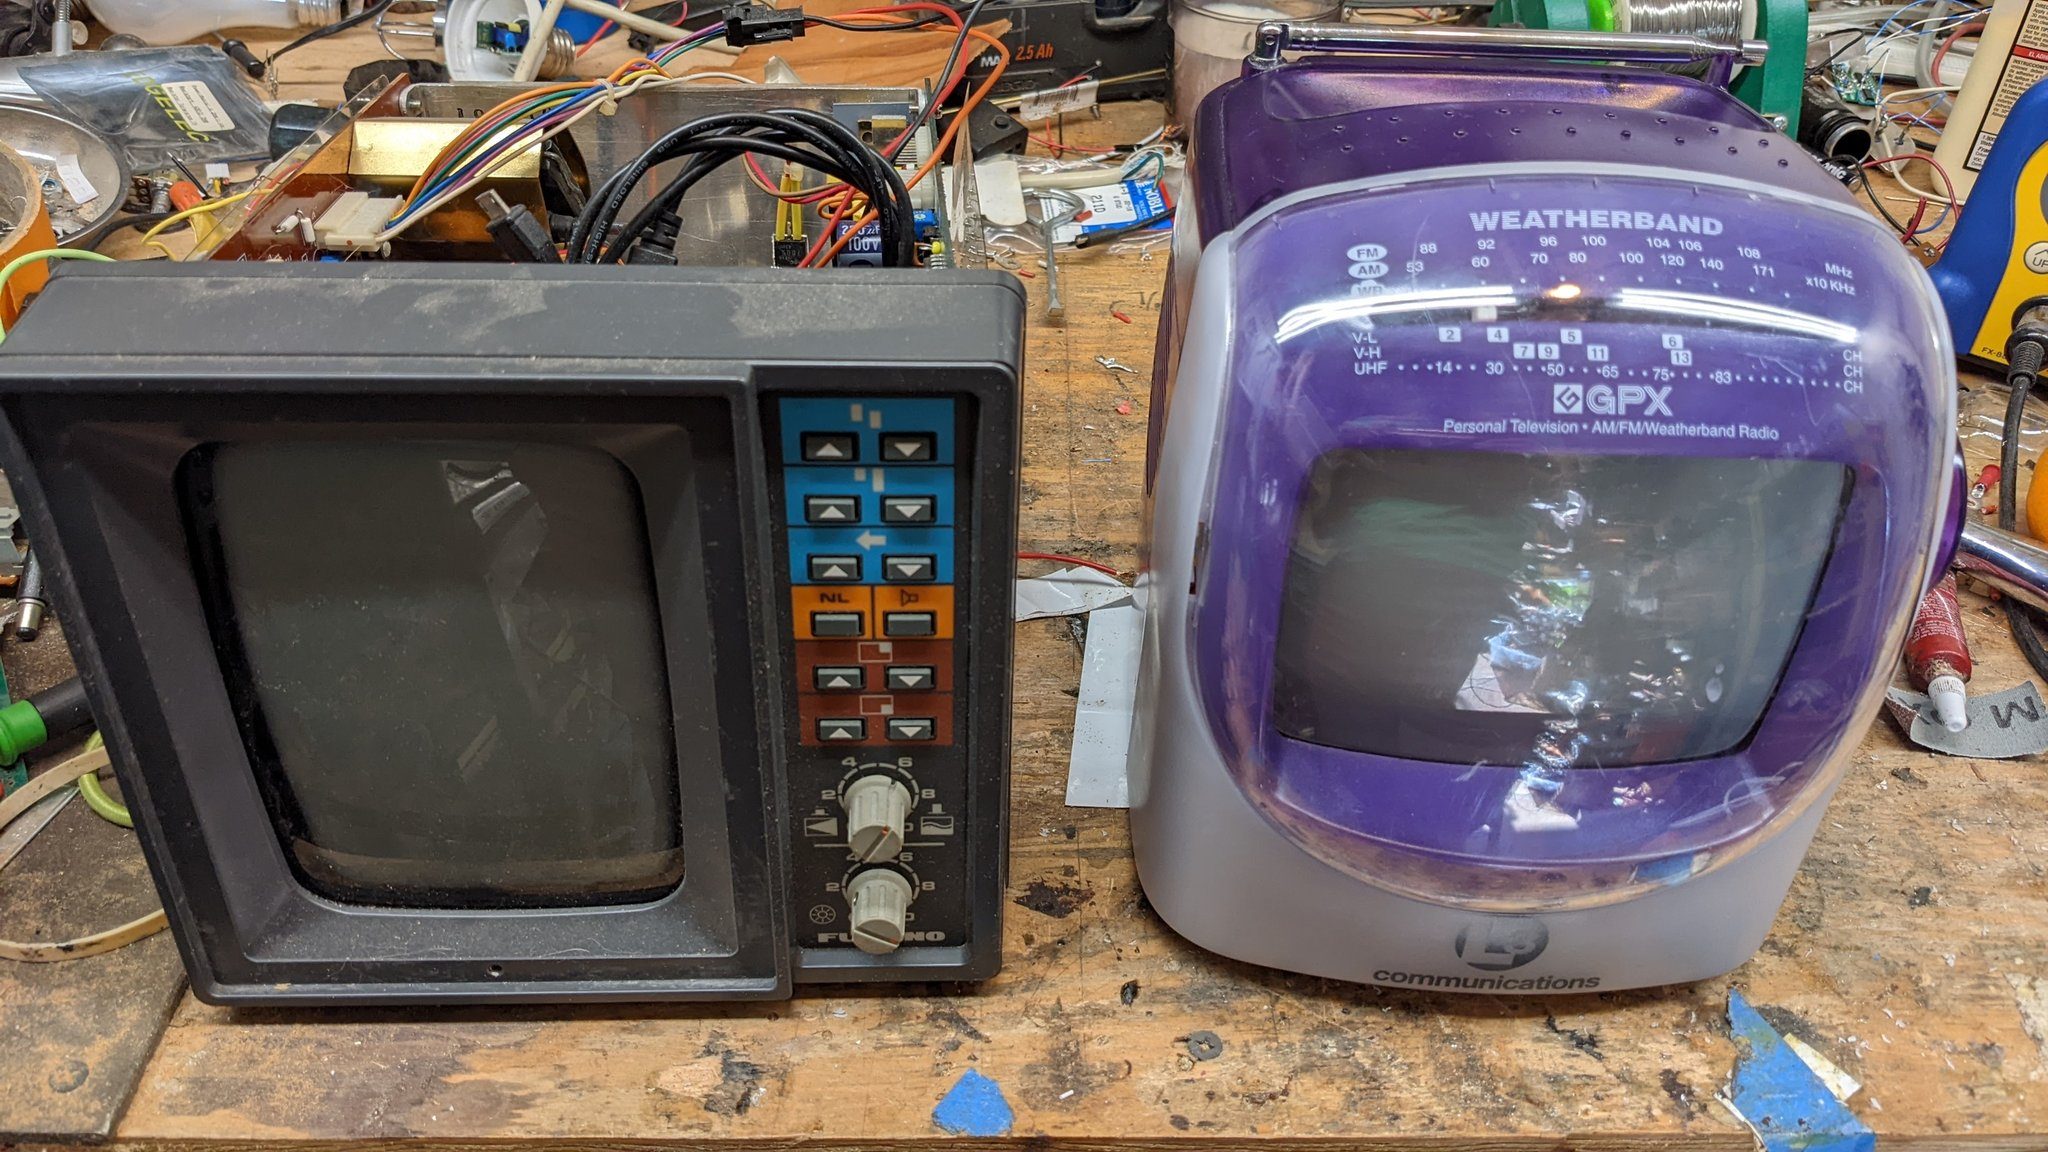 Pulling Off A CRT Transplant Doesn’t Have To Be Tricky!